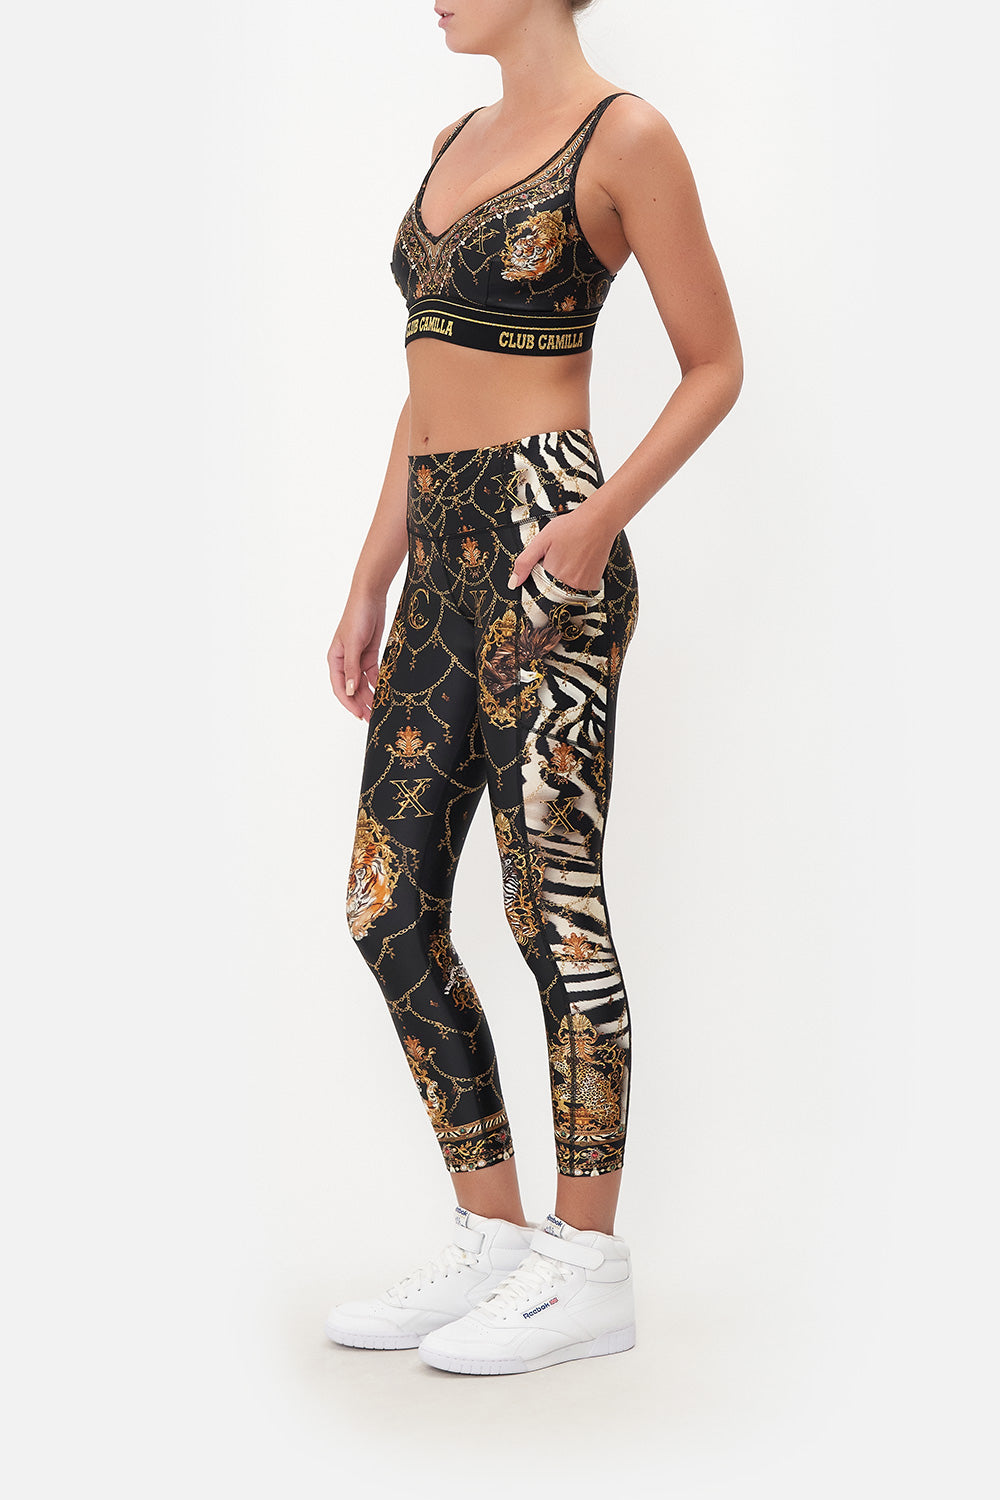 CAMILLA V-Neck Active Crop - Knights of Jaggis Table - CAMILLA - [product type] - Magpie Style